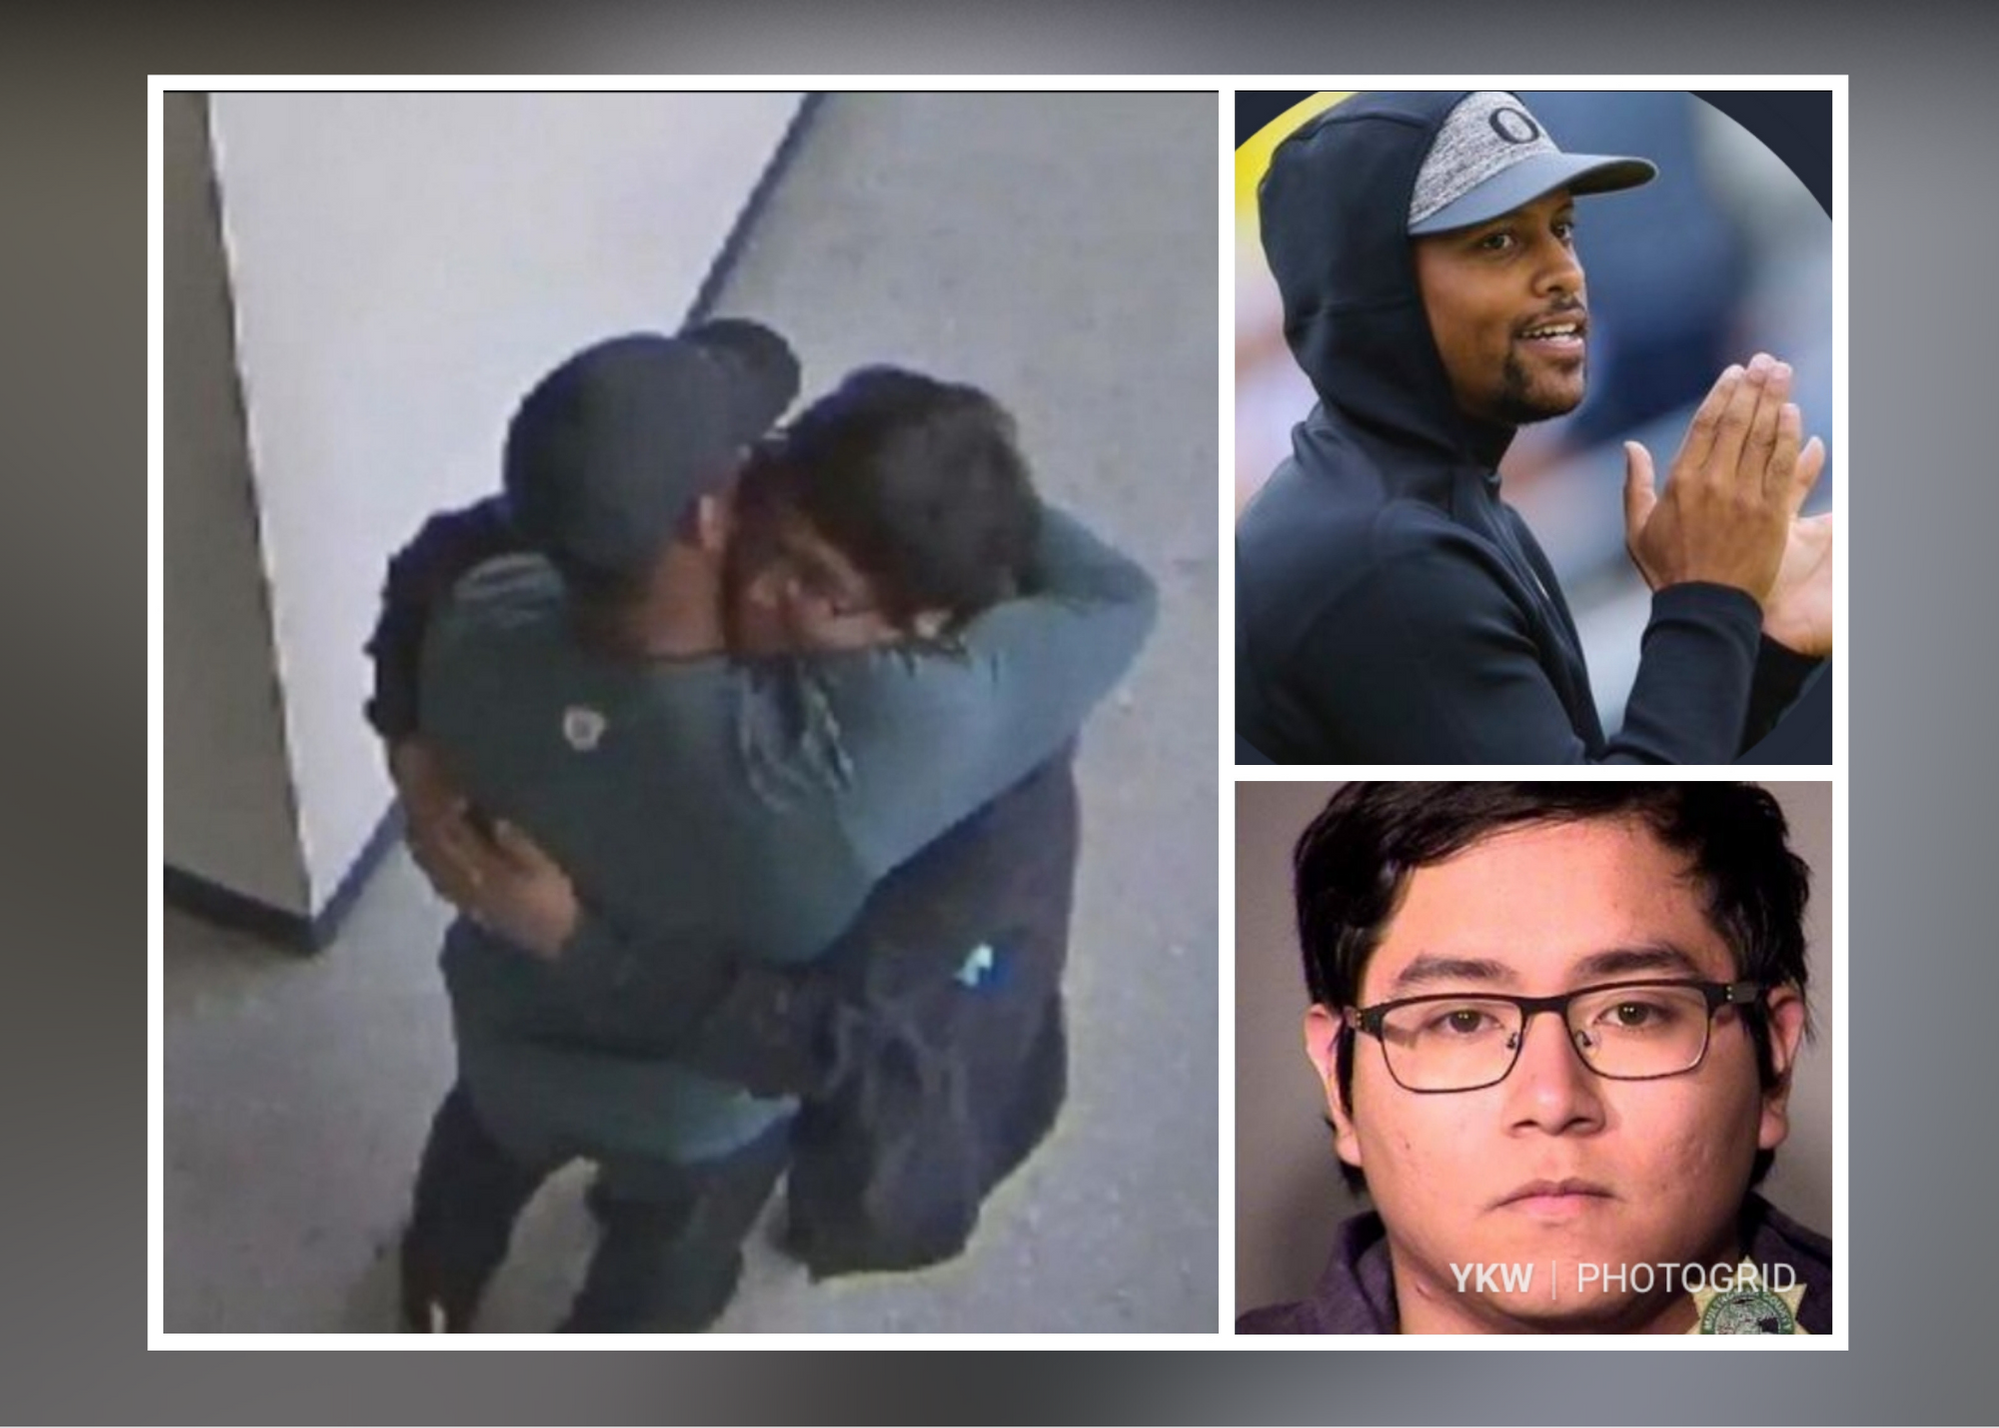 Video Shows Oregon Coach Disarm And Embrace Potential High School Shooter